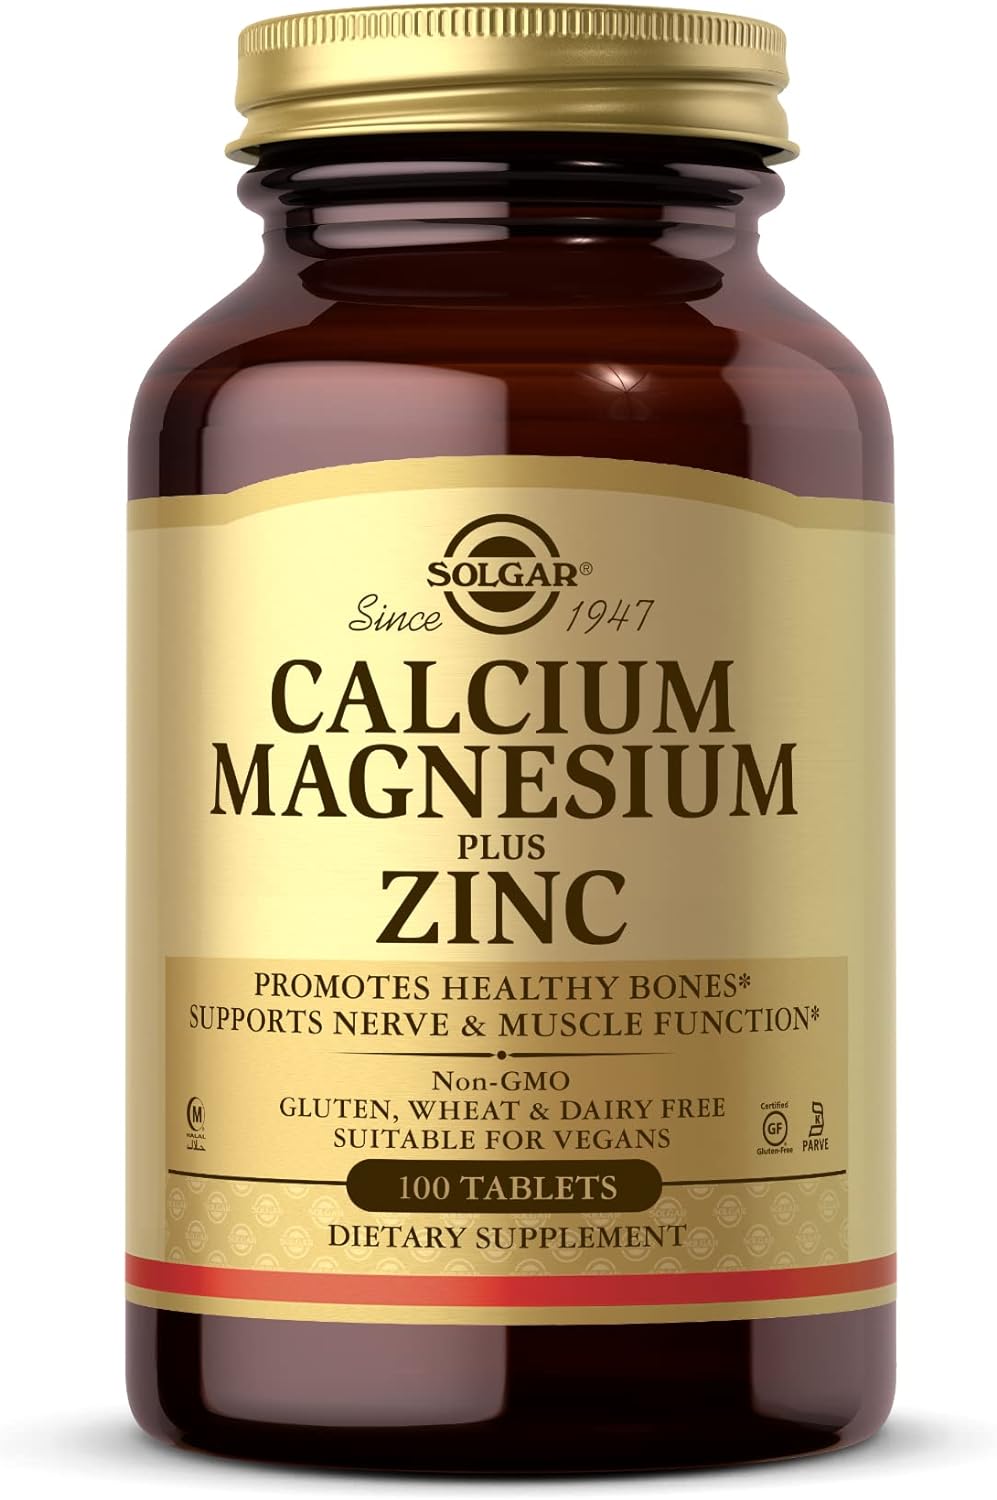 Solgar Calcium Magnesium Plus Zinc, 100 Tablets - Promotes Healthy Bones and Teeth - Supports Nerve & Muscle Function -